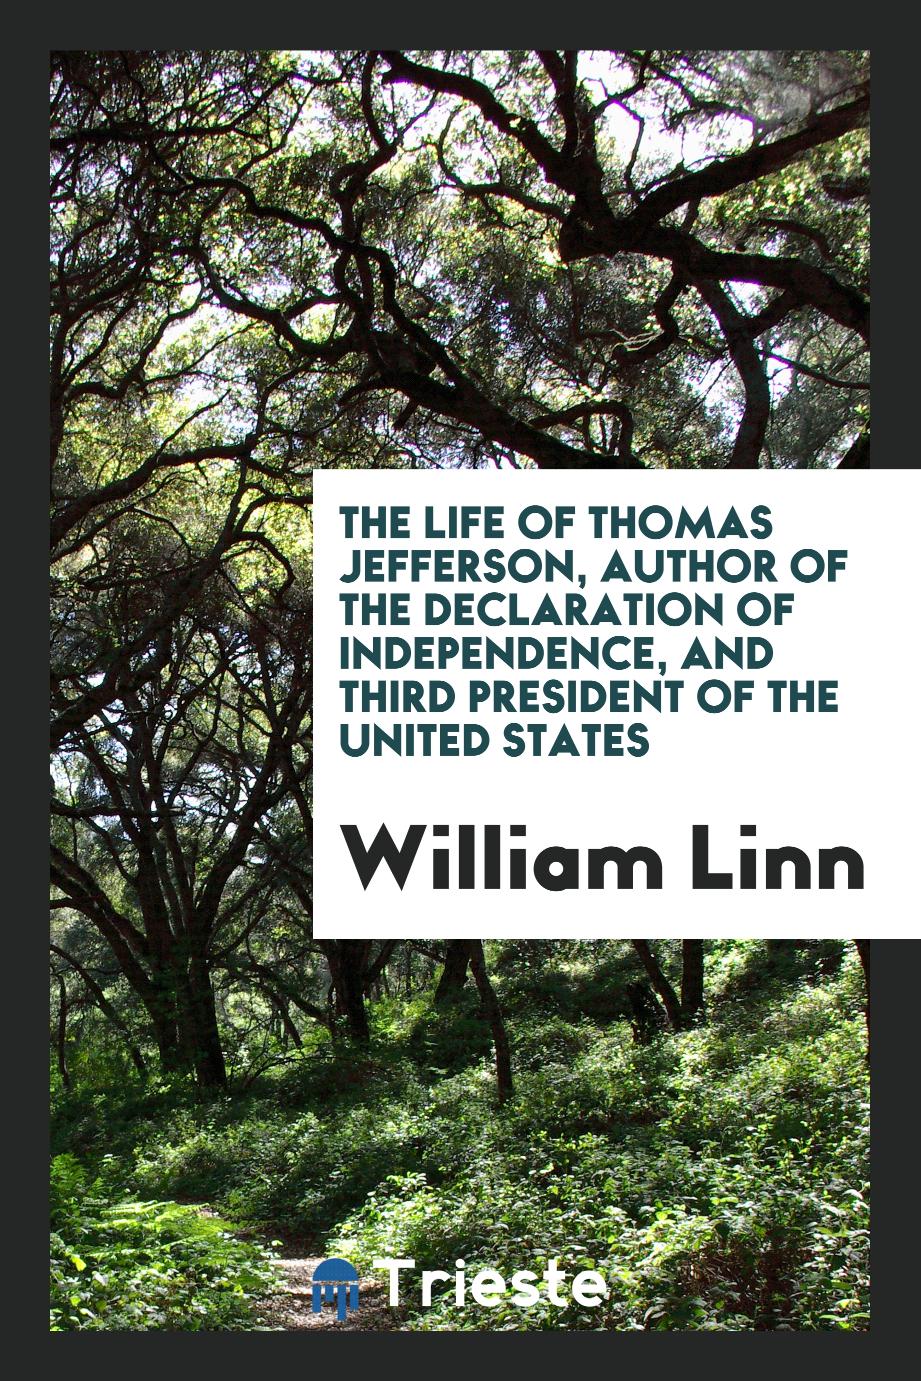 The Life of Thomas Jefferson, Author of the Declaration of Independence, and Third President of the United States